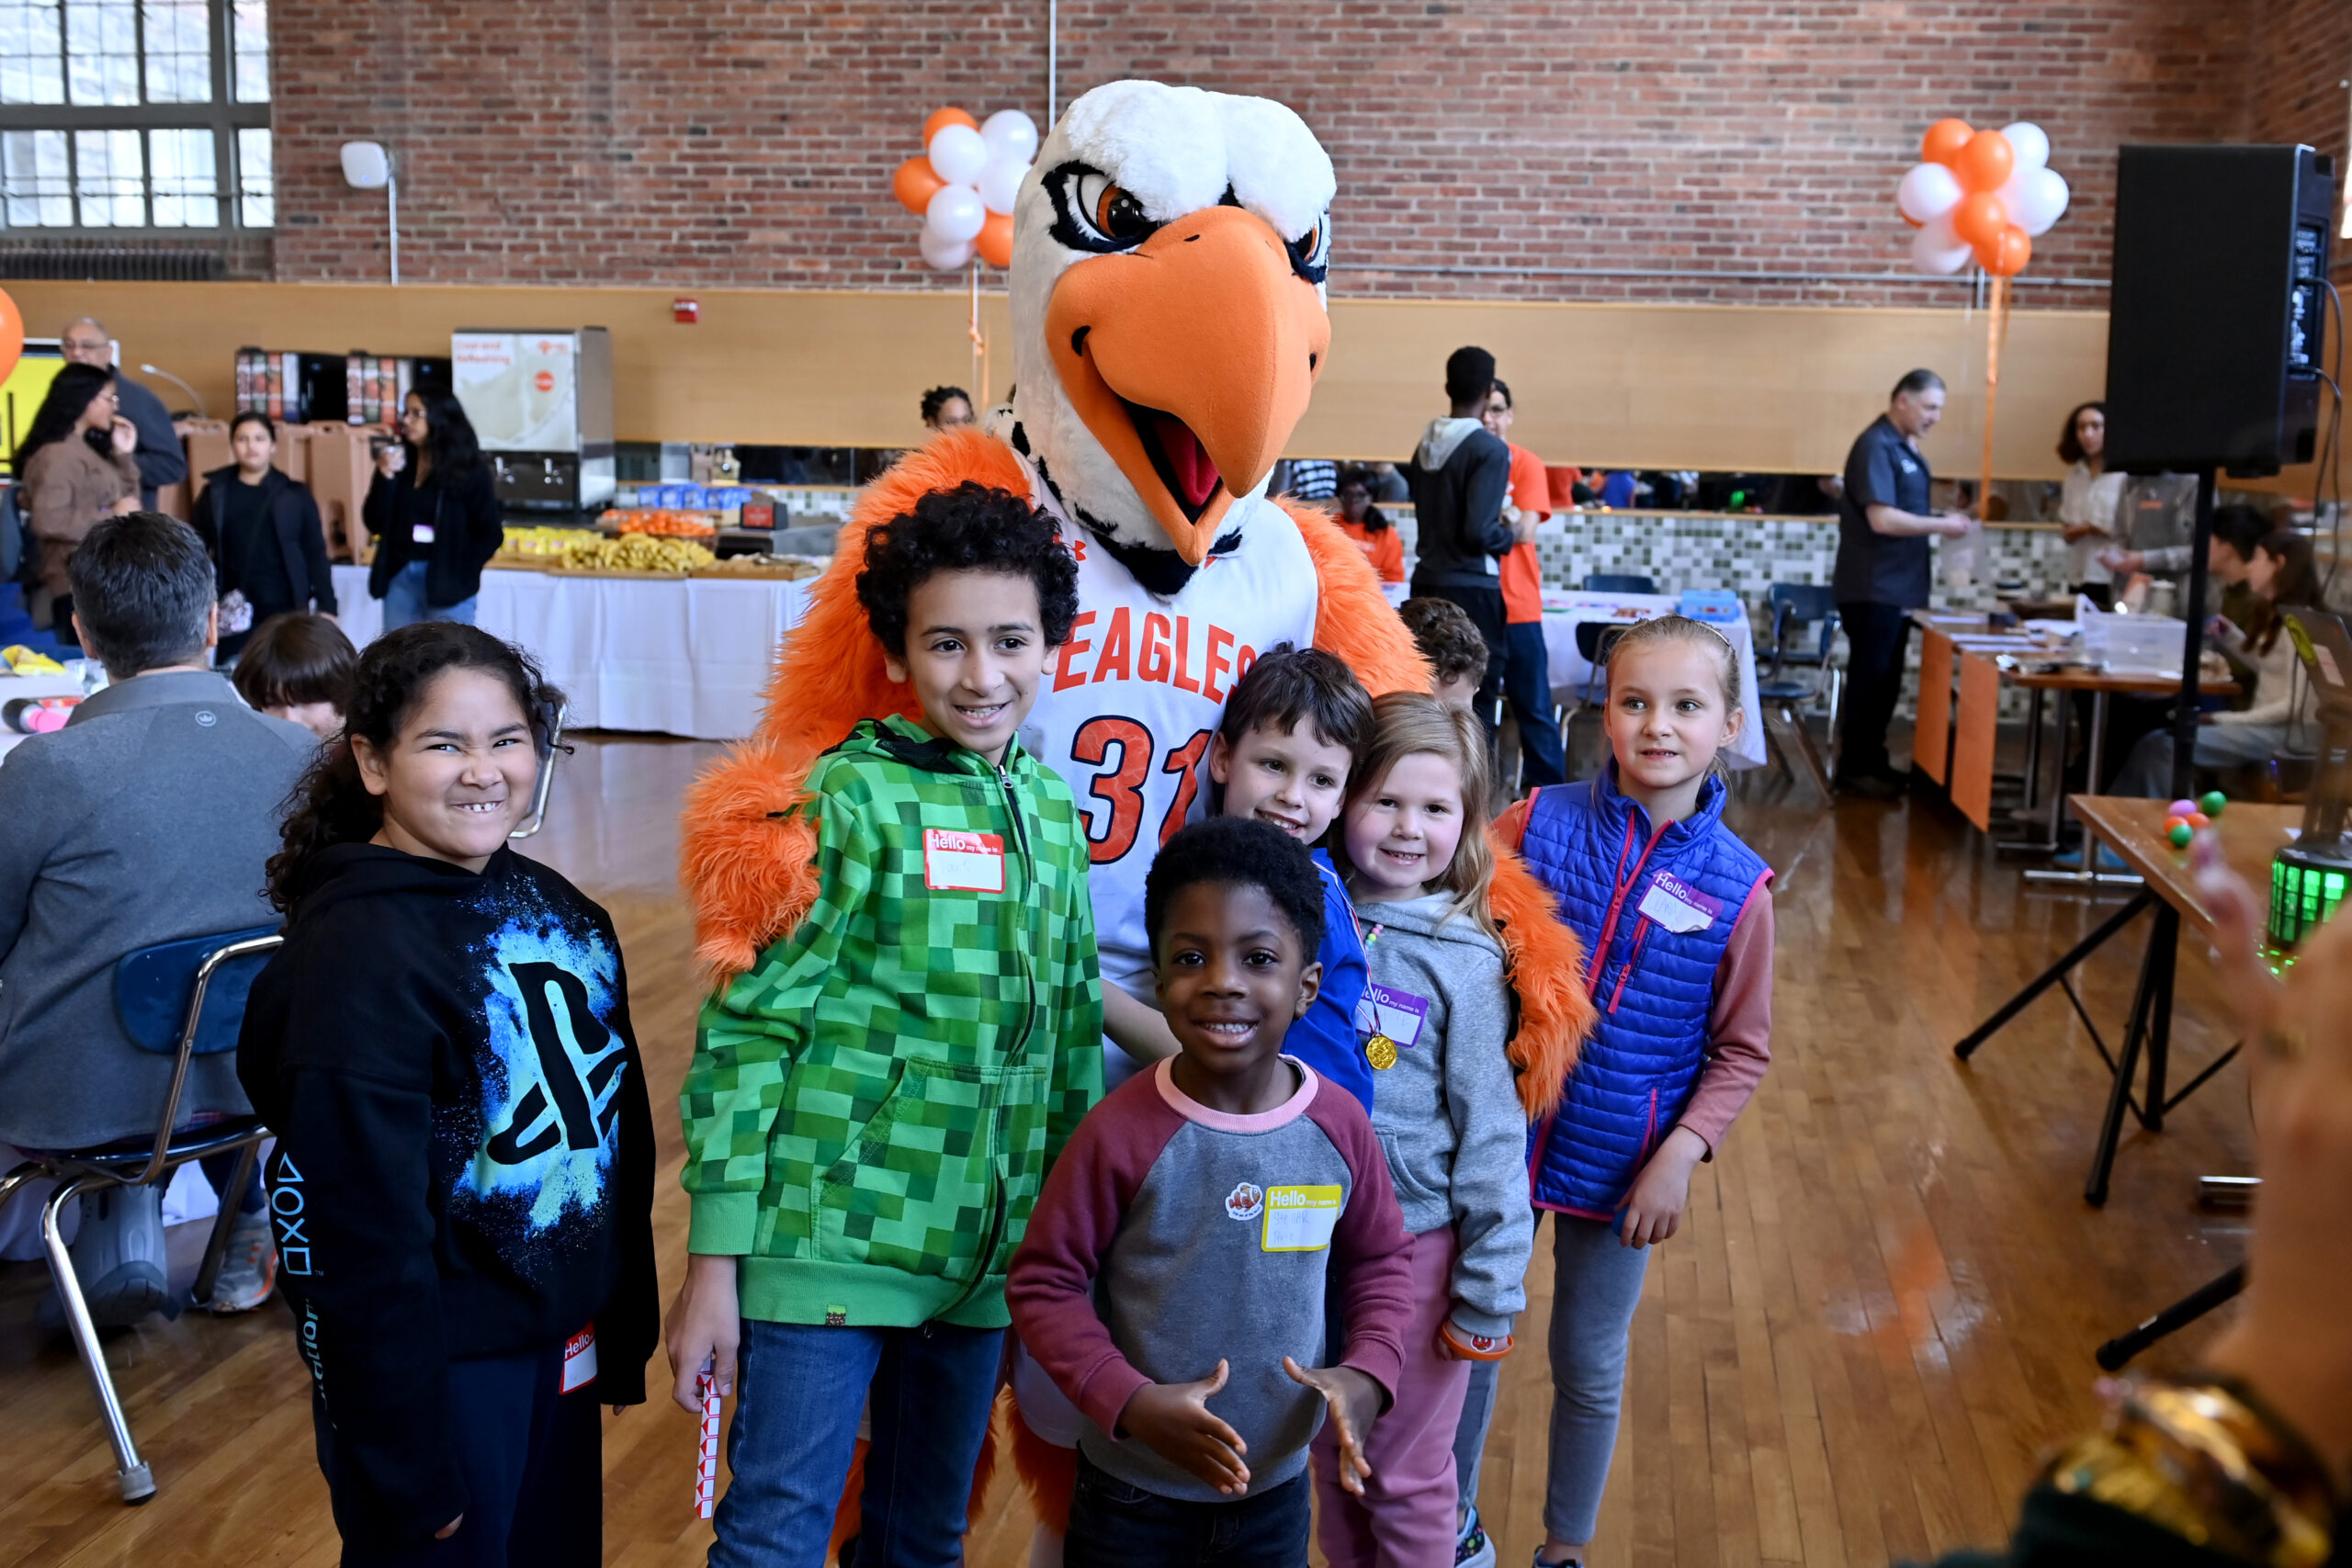 A group of elementary school aged kids pose for a picture with the ECFS Eagle mascot